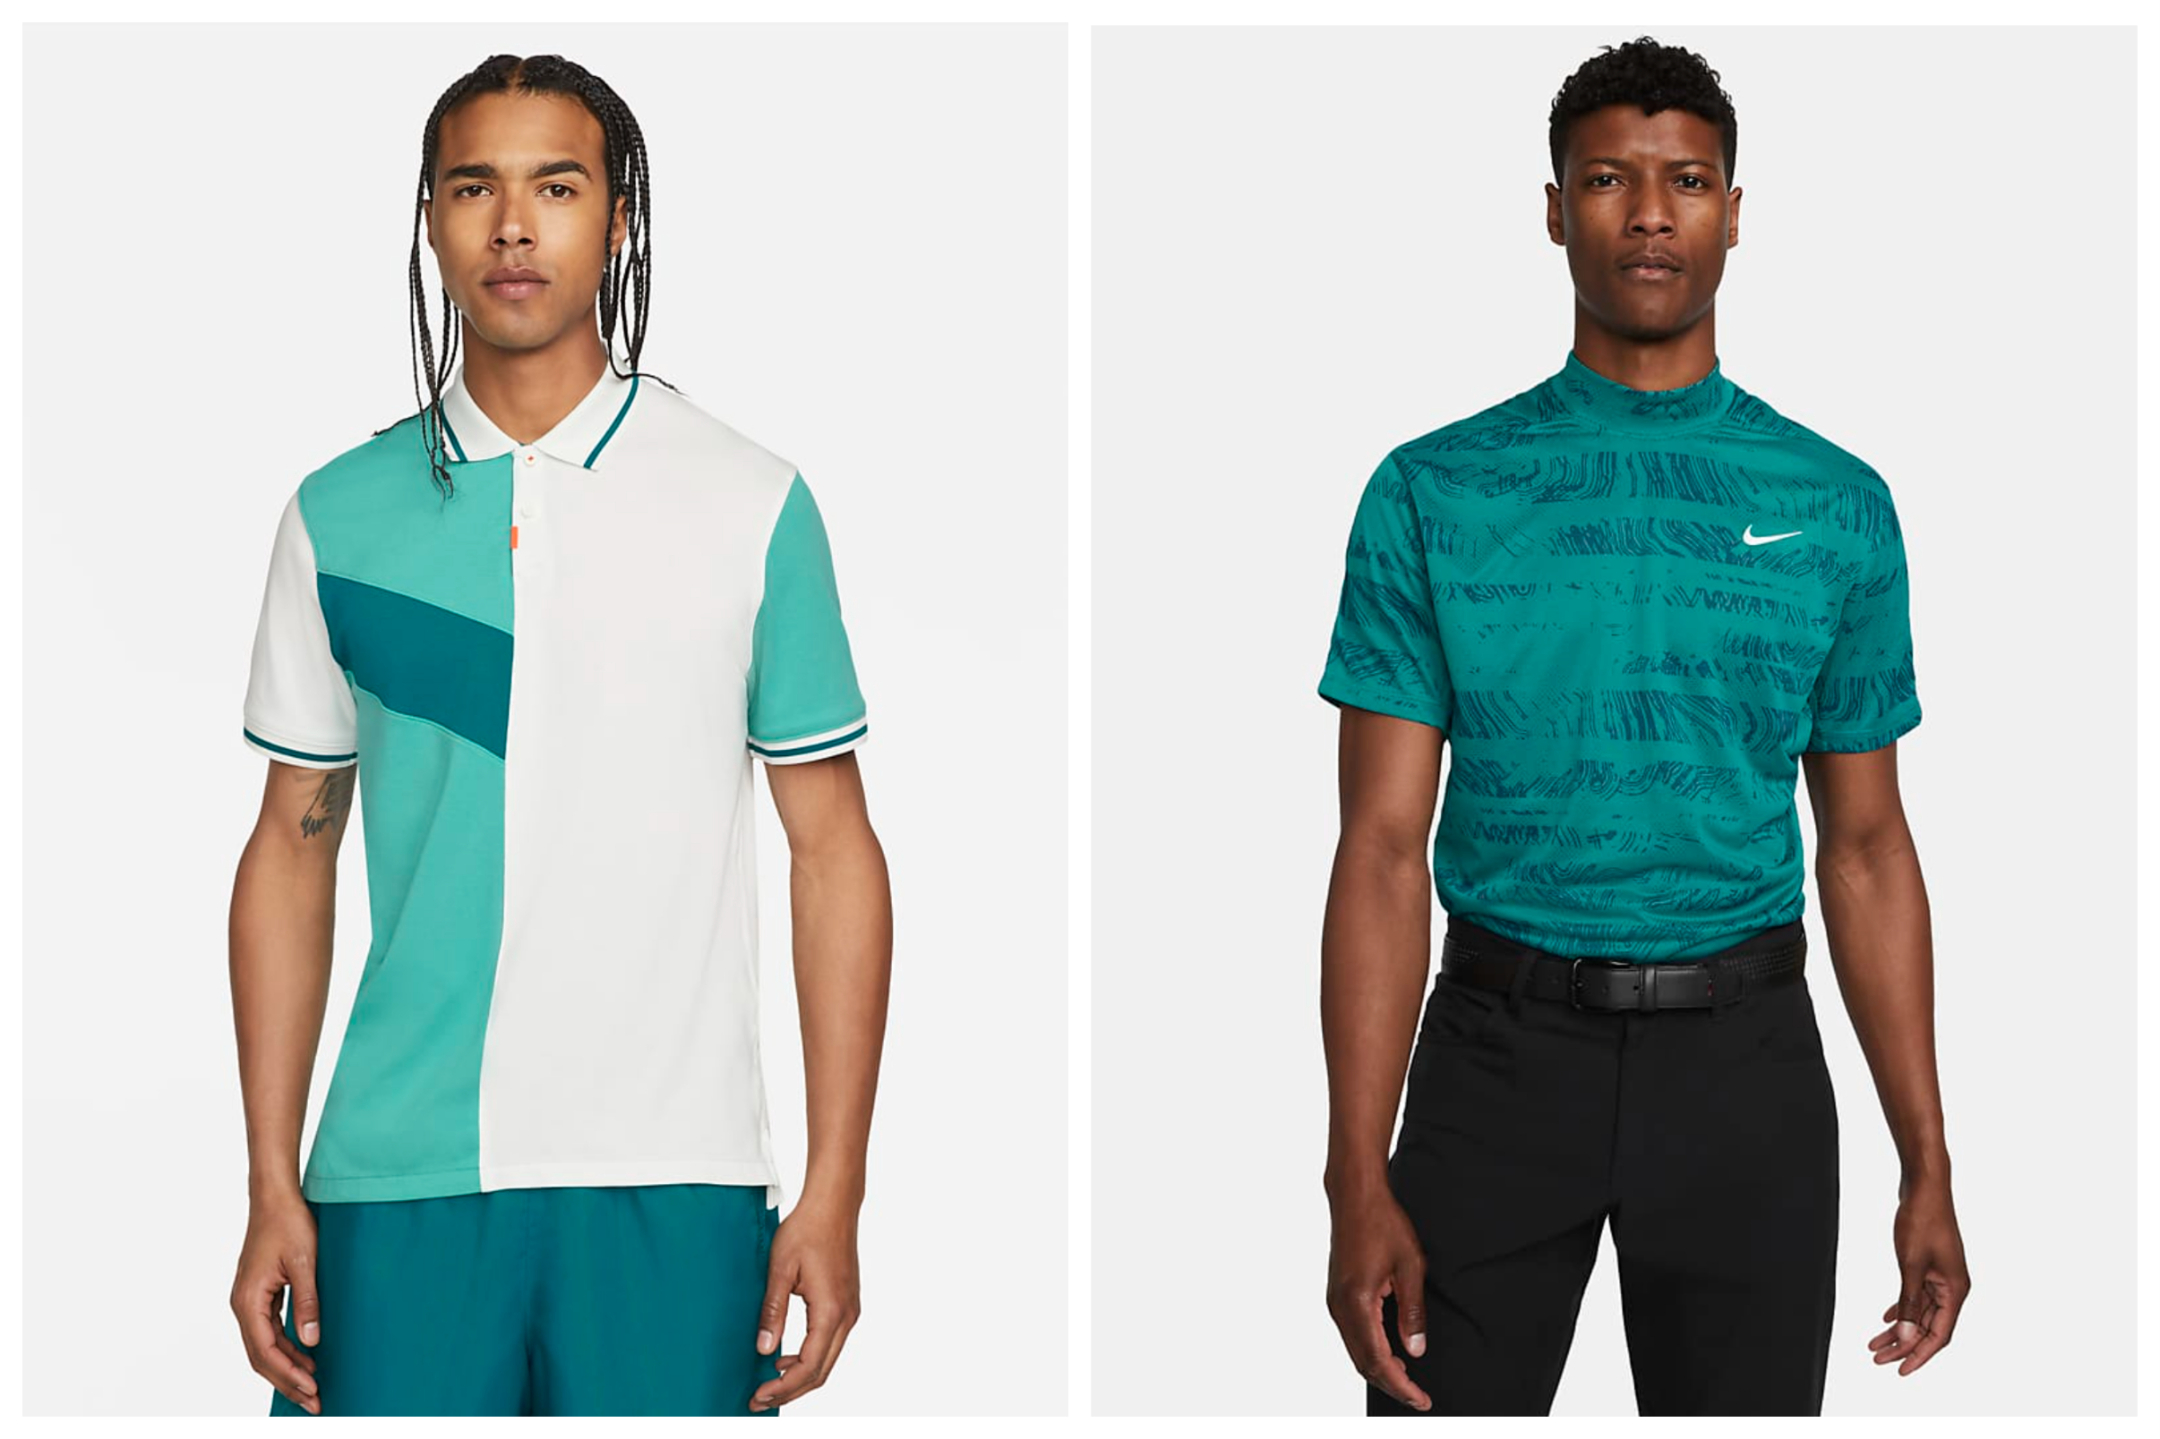 aim Sentimental Pay attention to The BEST Nike Golf shirts as seen at the PGA Championship | GolfMagic